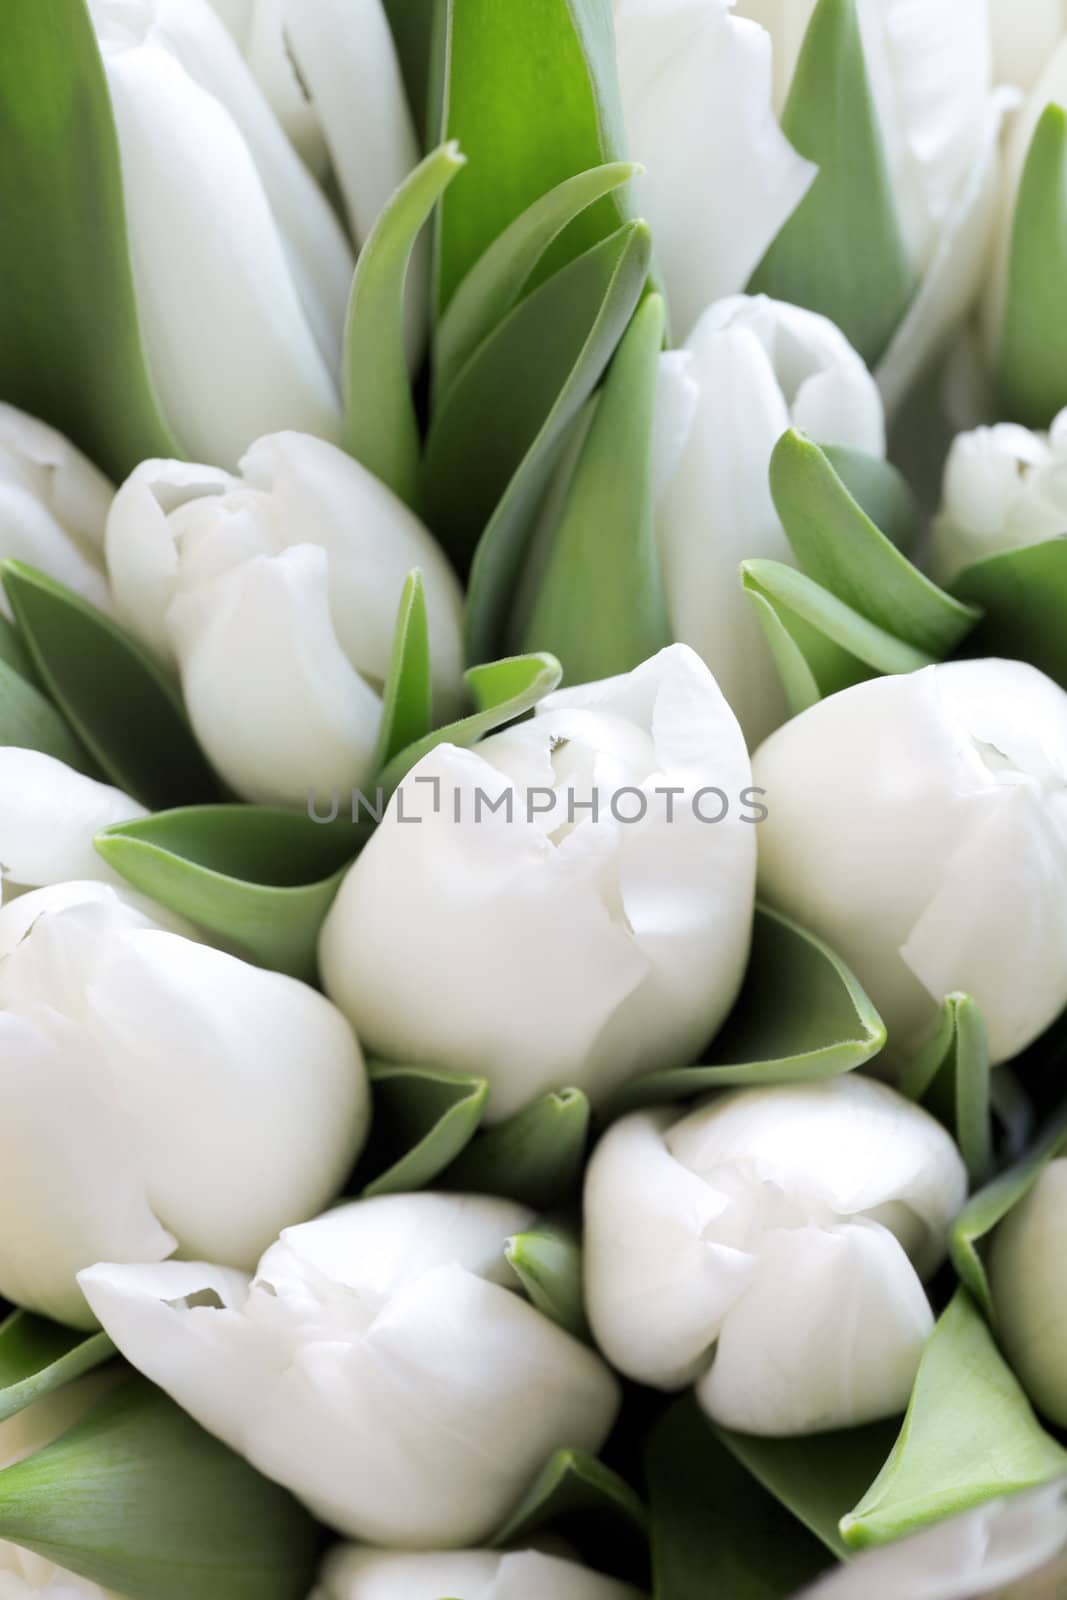 White gentle tulips in an environment of green foliage